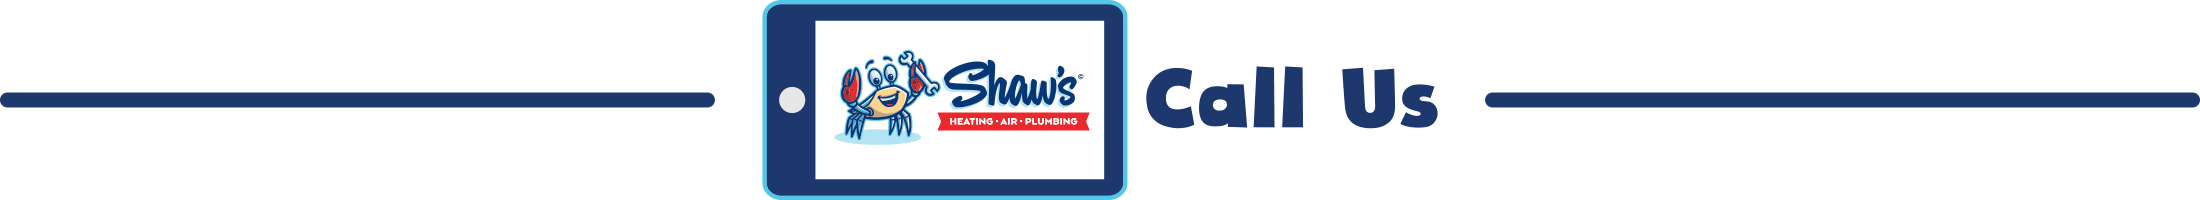 Call Shaw's Heating, Air and Plumbing for Furnace repair in Saint Michaels